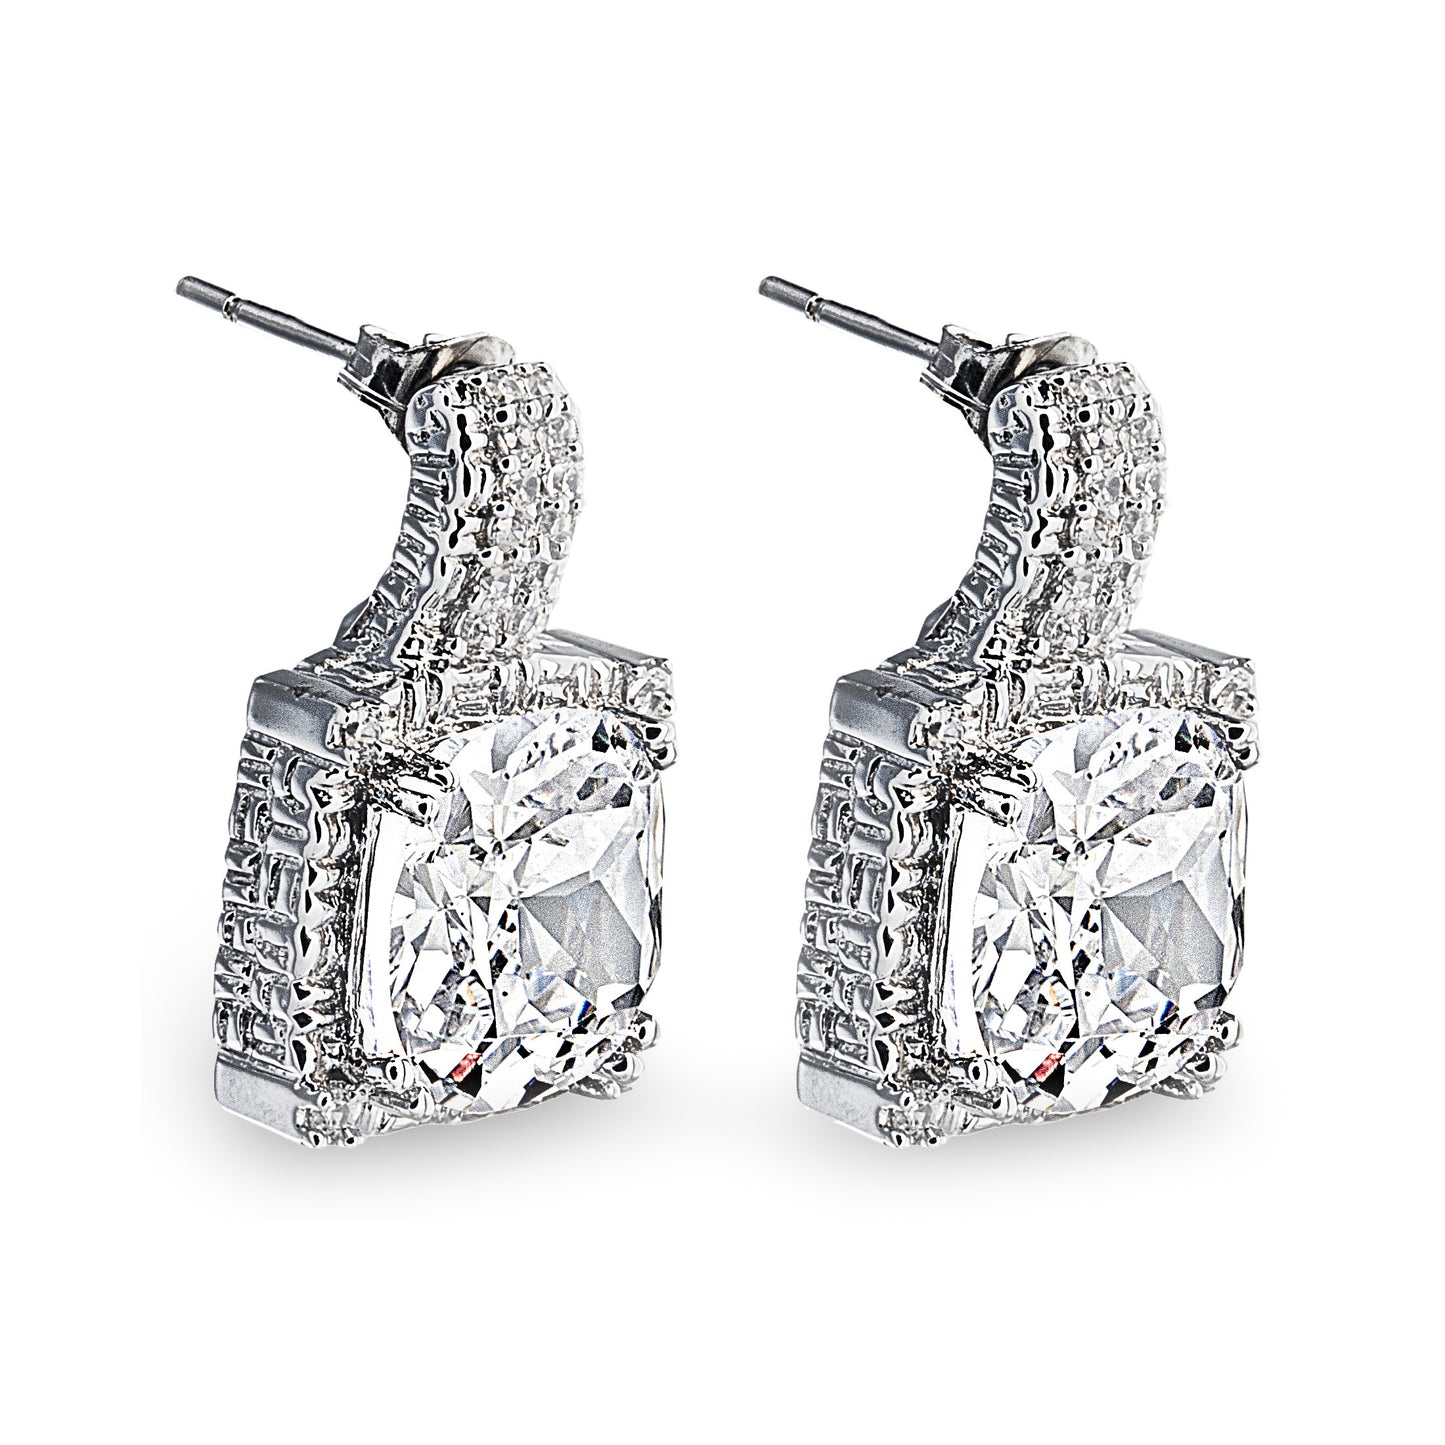 Parisian-inspired Regina Drop Earrings are made of 925 sterling silver and feature a showy 'princess cut' cubic zirconia stone surrounded by a woven silver design. Jewellery by Bellagio & Co. Worldwide shipping.